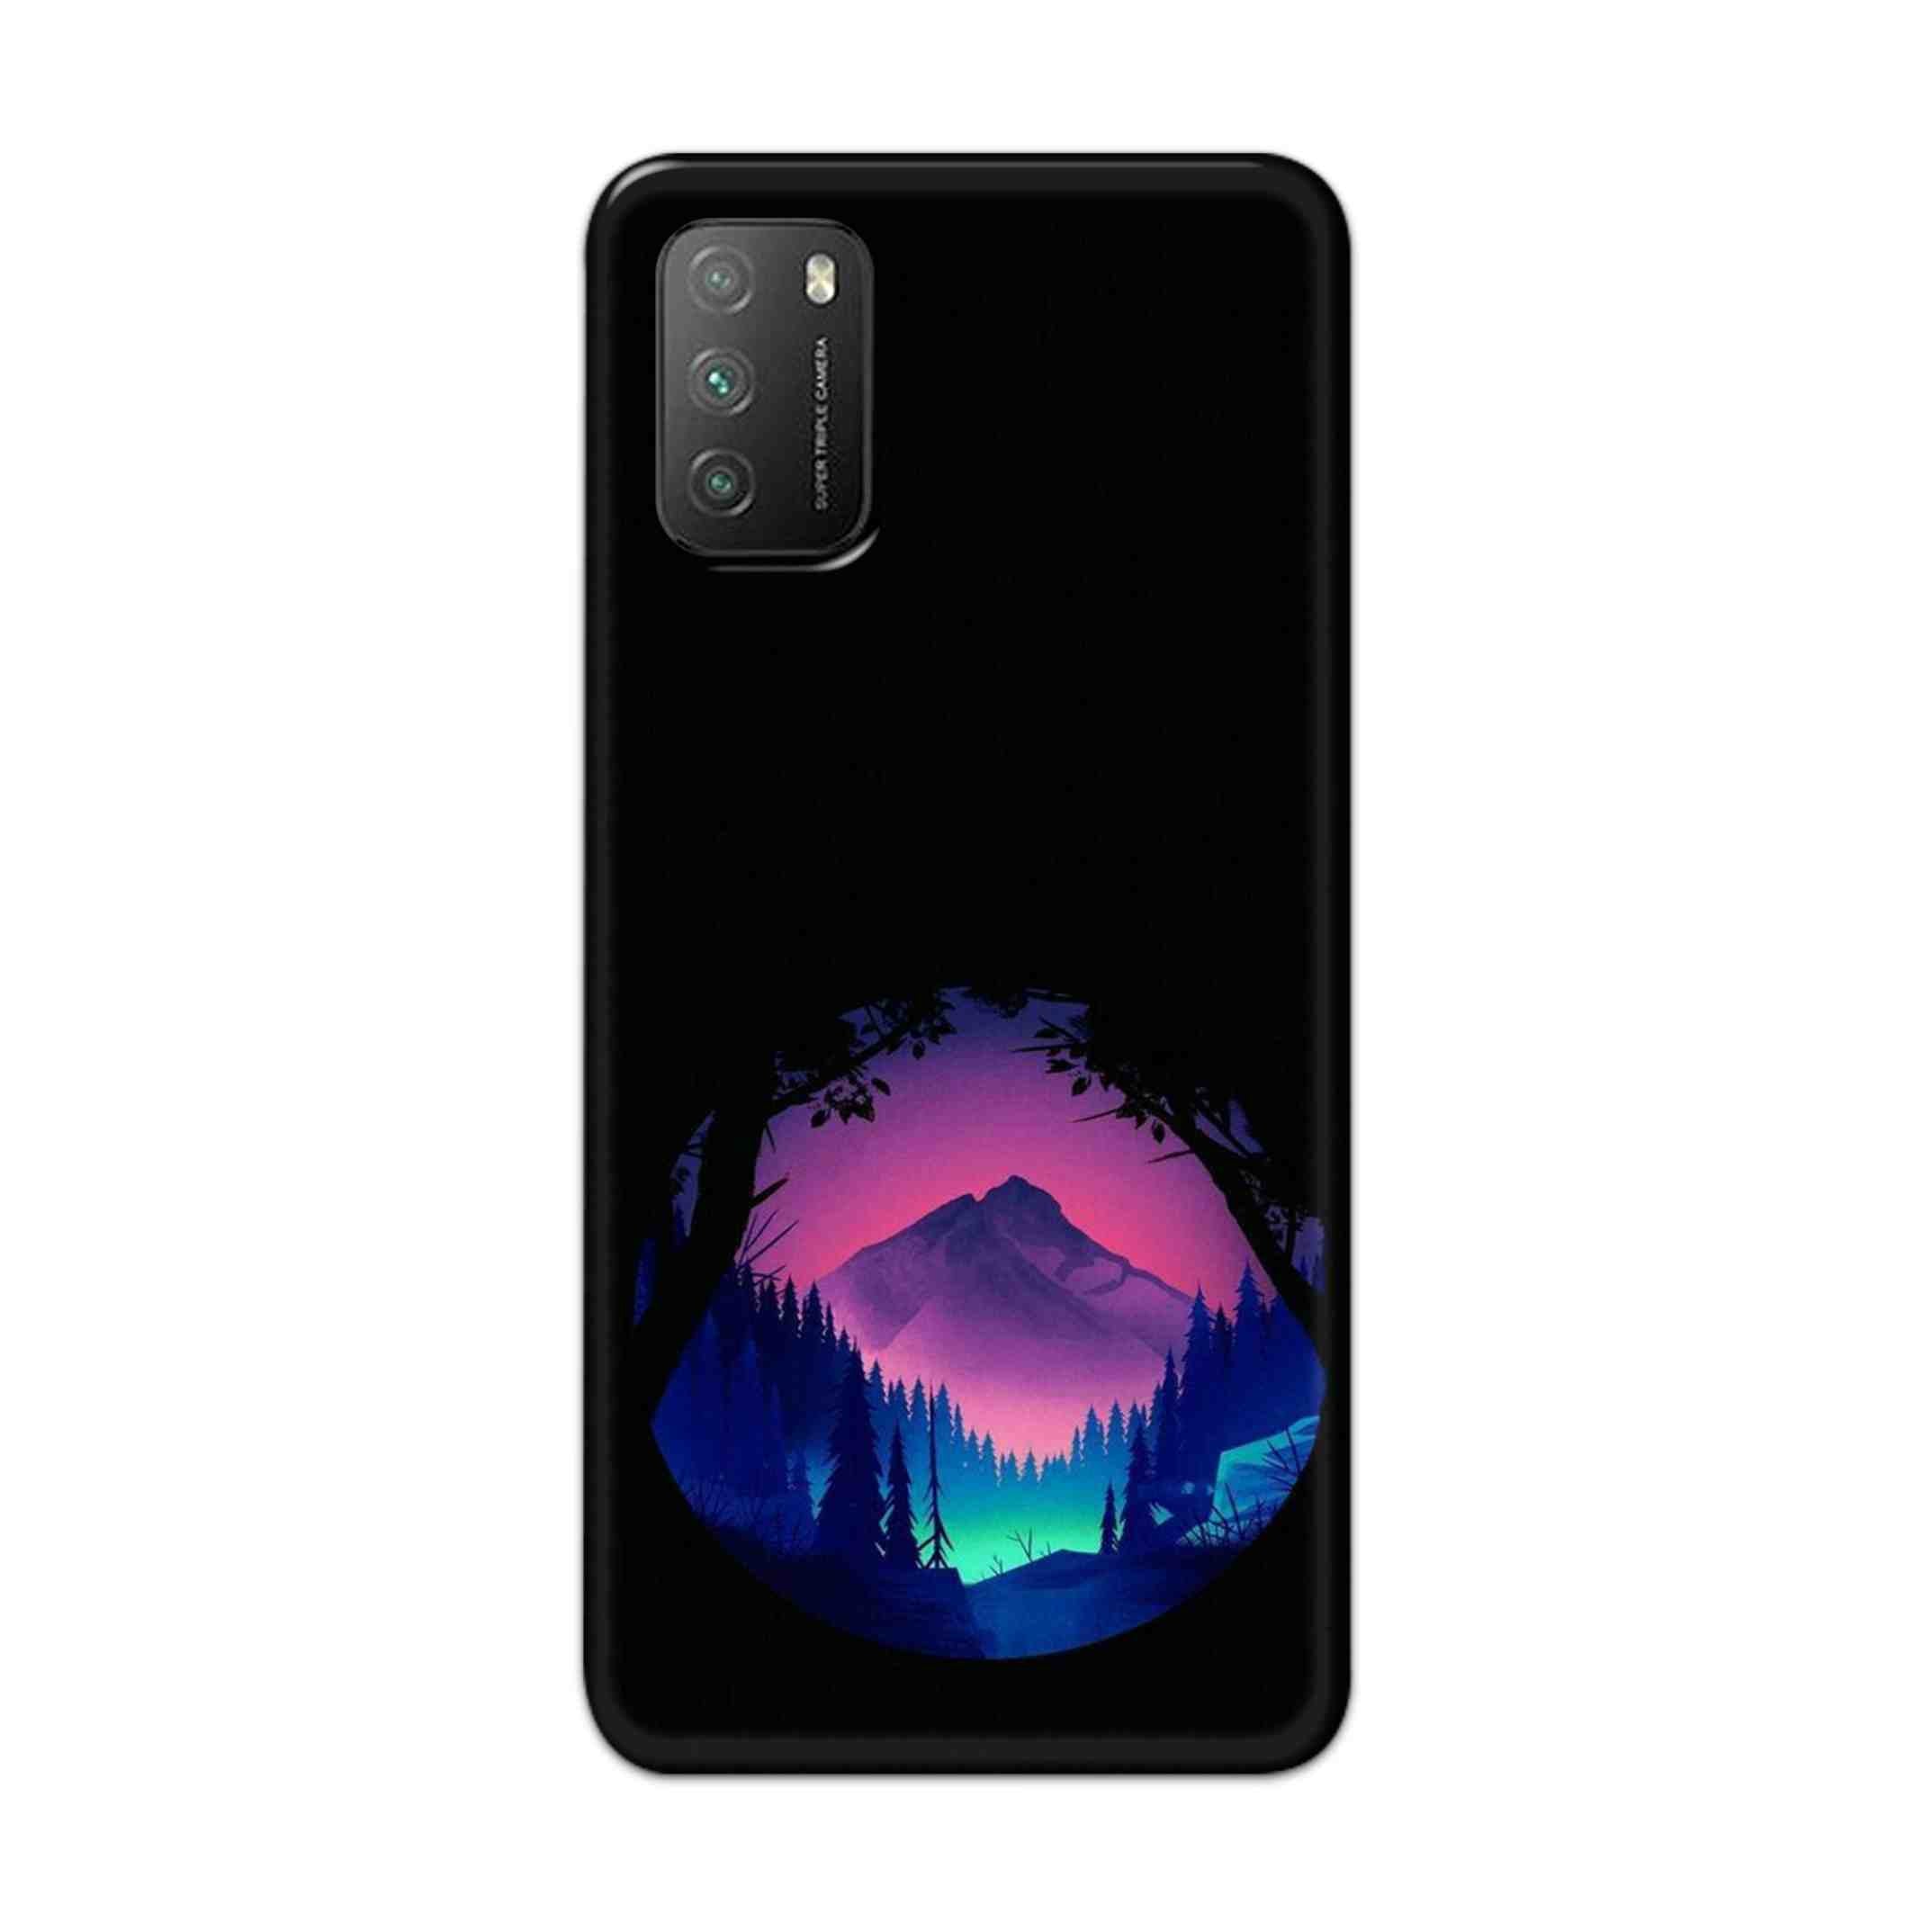 Buy Neon Tables Hard Back Mobile Phone Case Cover For Poco M3 Online